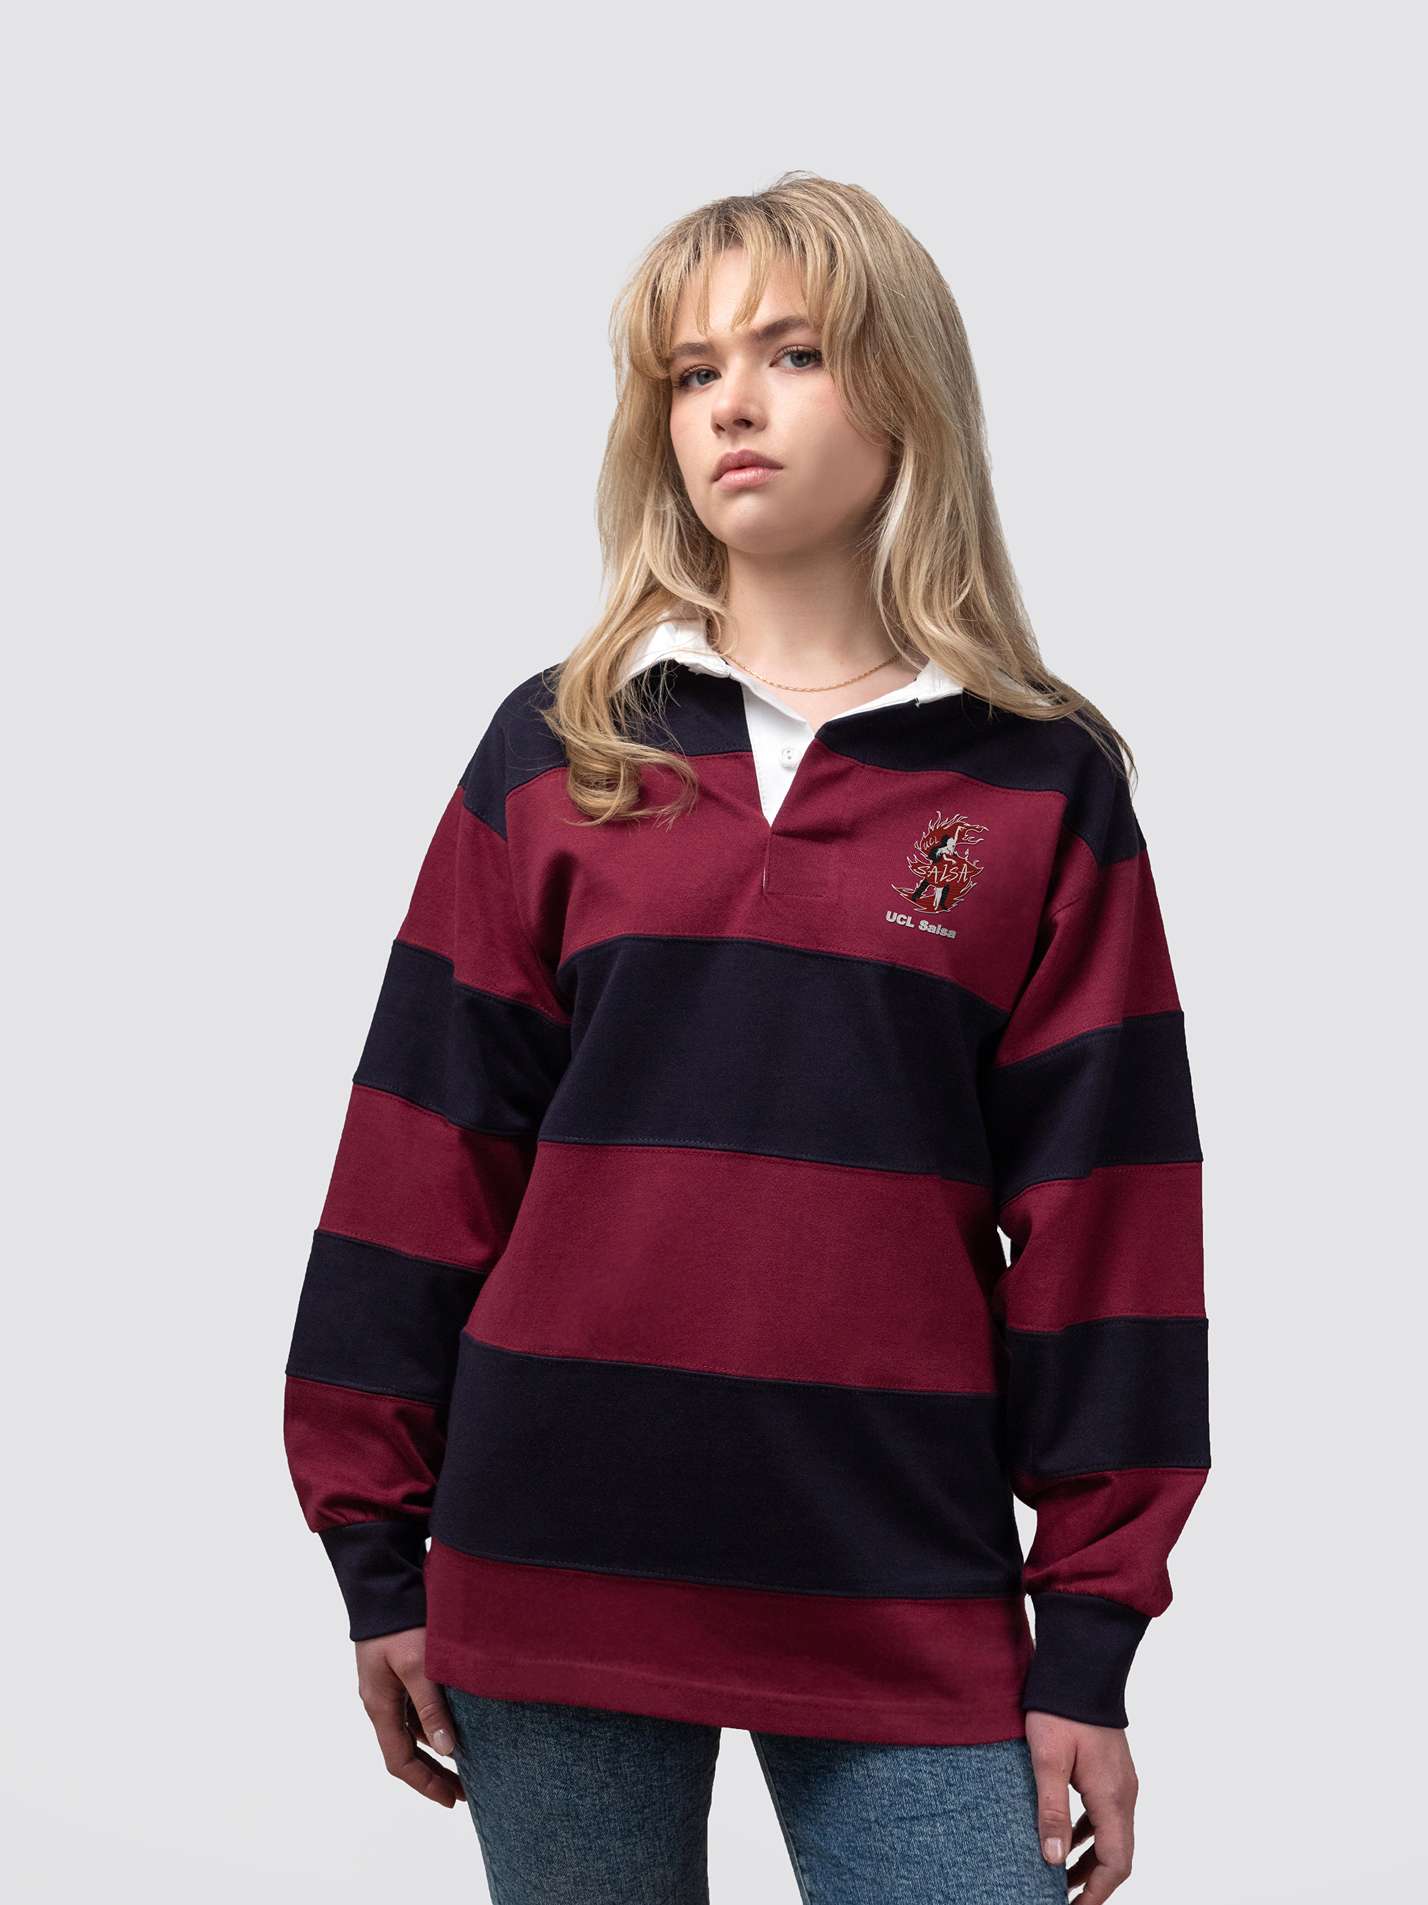 UCL Salsa Unisex Striped Rugby Shirt